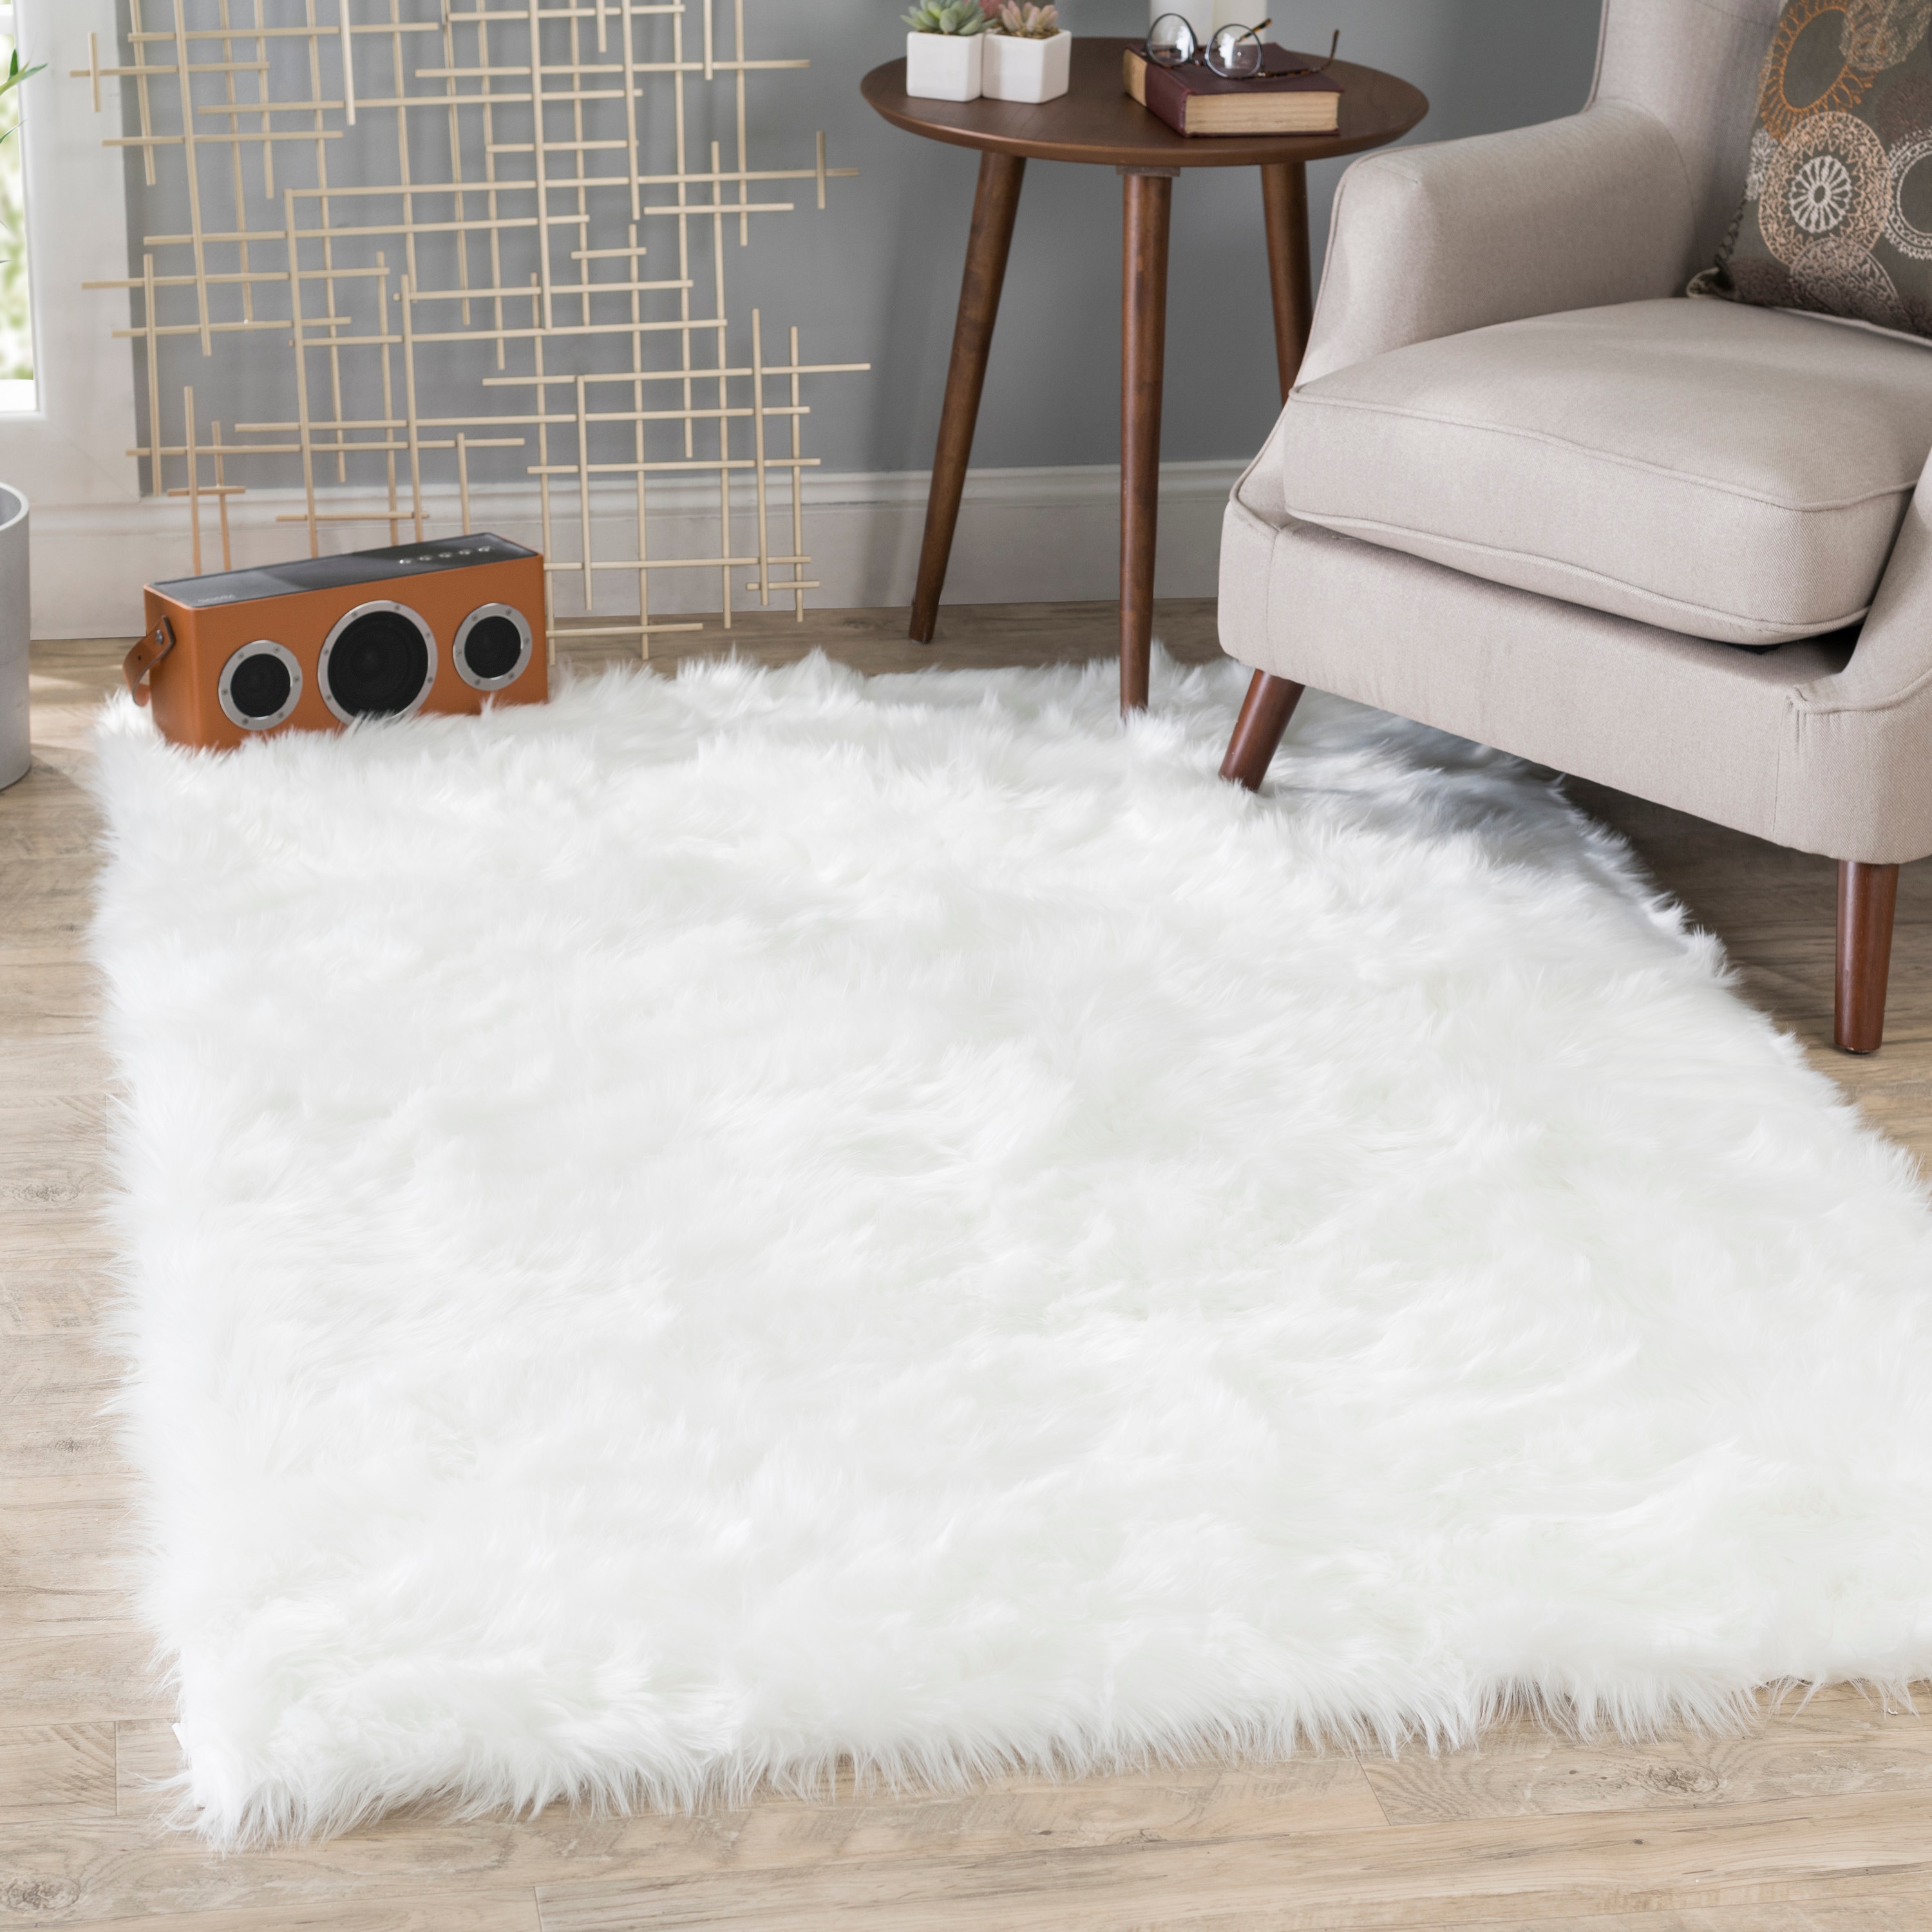 OFF WHITE Faux FUR area Rug 3' x 5' washable non-slip MADE IN USA A NATURAL 